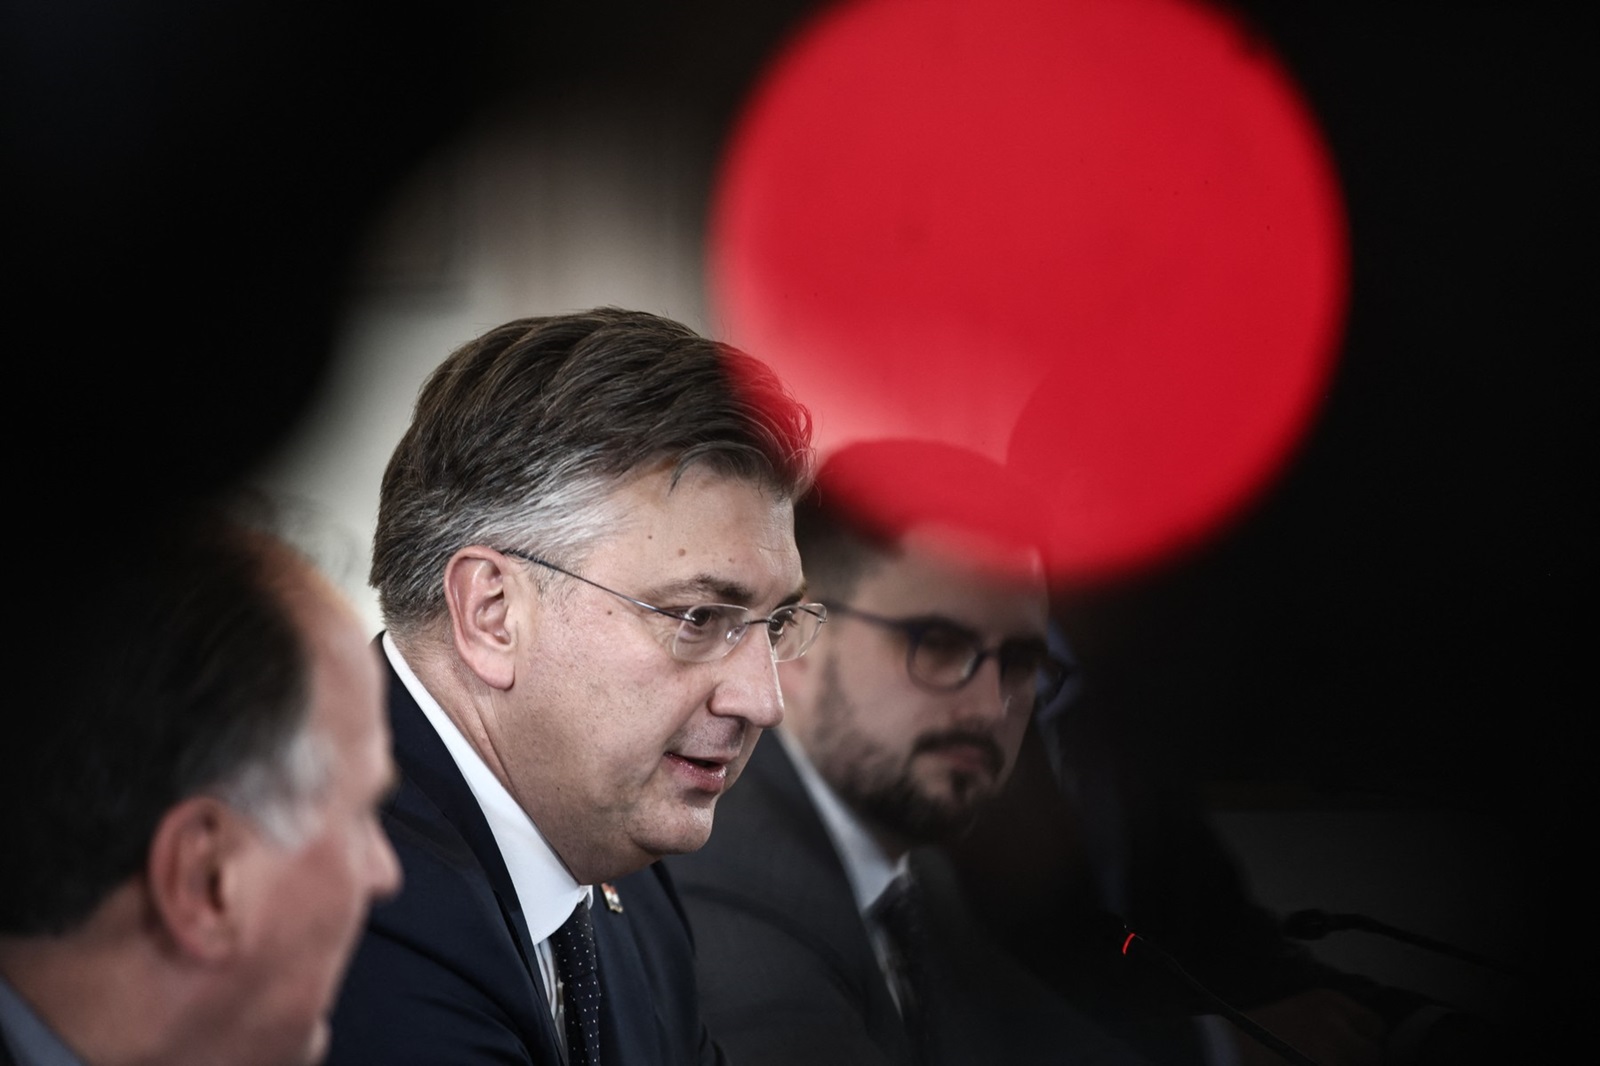 Meeting of the Prime Minister, Kyriakos Mitsotakis, with the Prime Minister of Croatia, Andrej Plenkovic,, at the Maximos Palace in Athens, Greece, on on Feb. 9, 2024 /,Image: 845015762, License: Rights-managed, Restrictions: Greece Out, Model Release: no, Credit line: Dimitris Kapantais / AFP / Profimedia